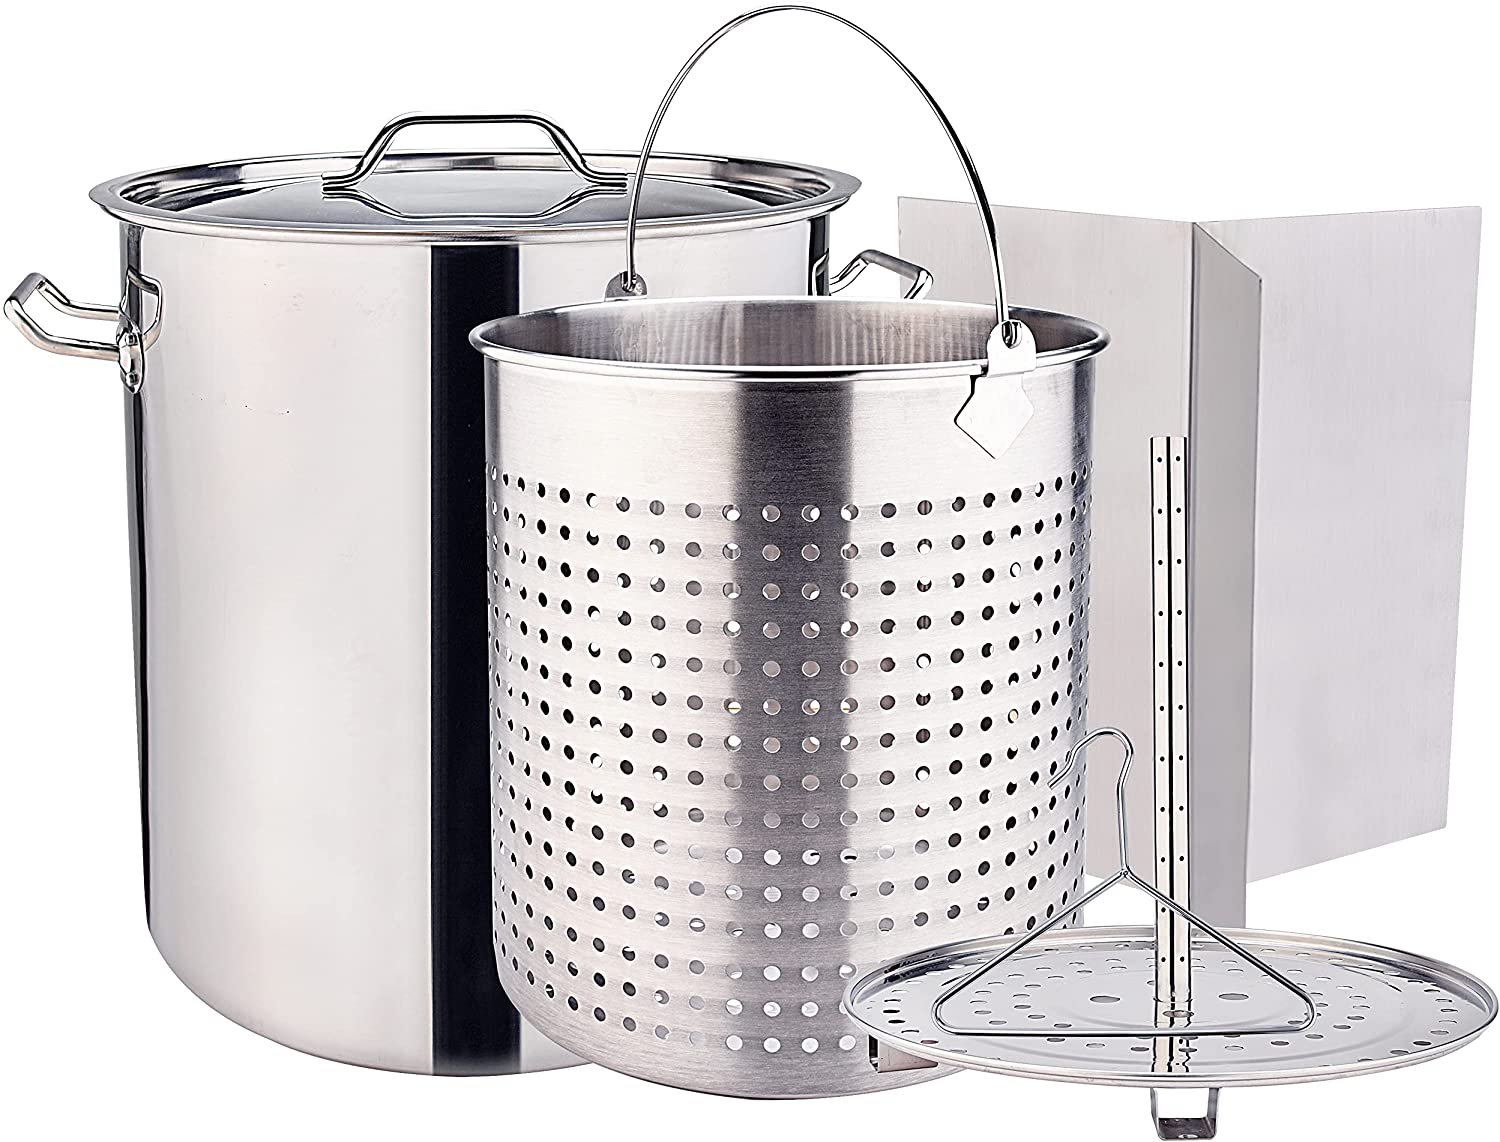  ARC 64-Quart Stainless Steel Seafood Boil Pot with